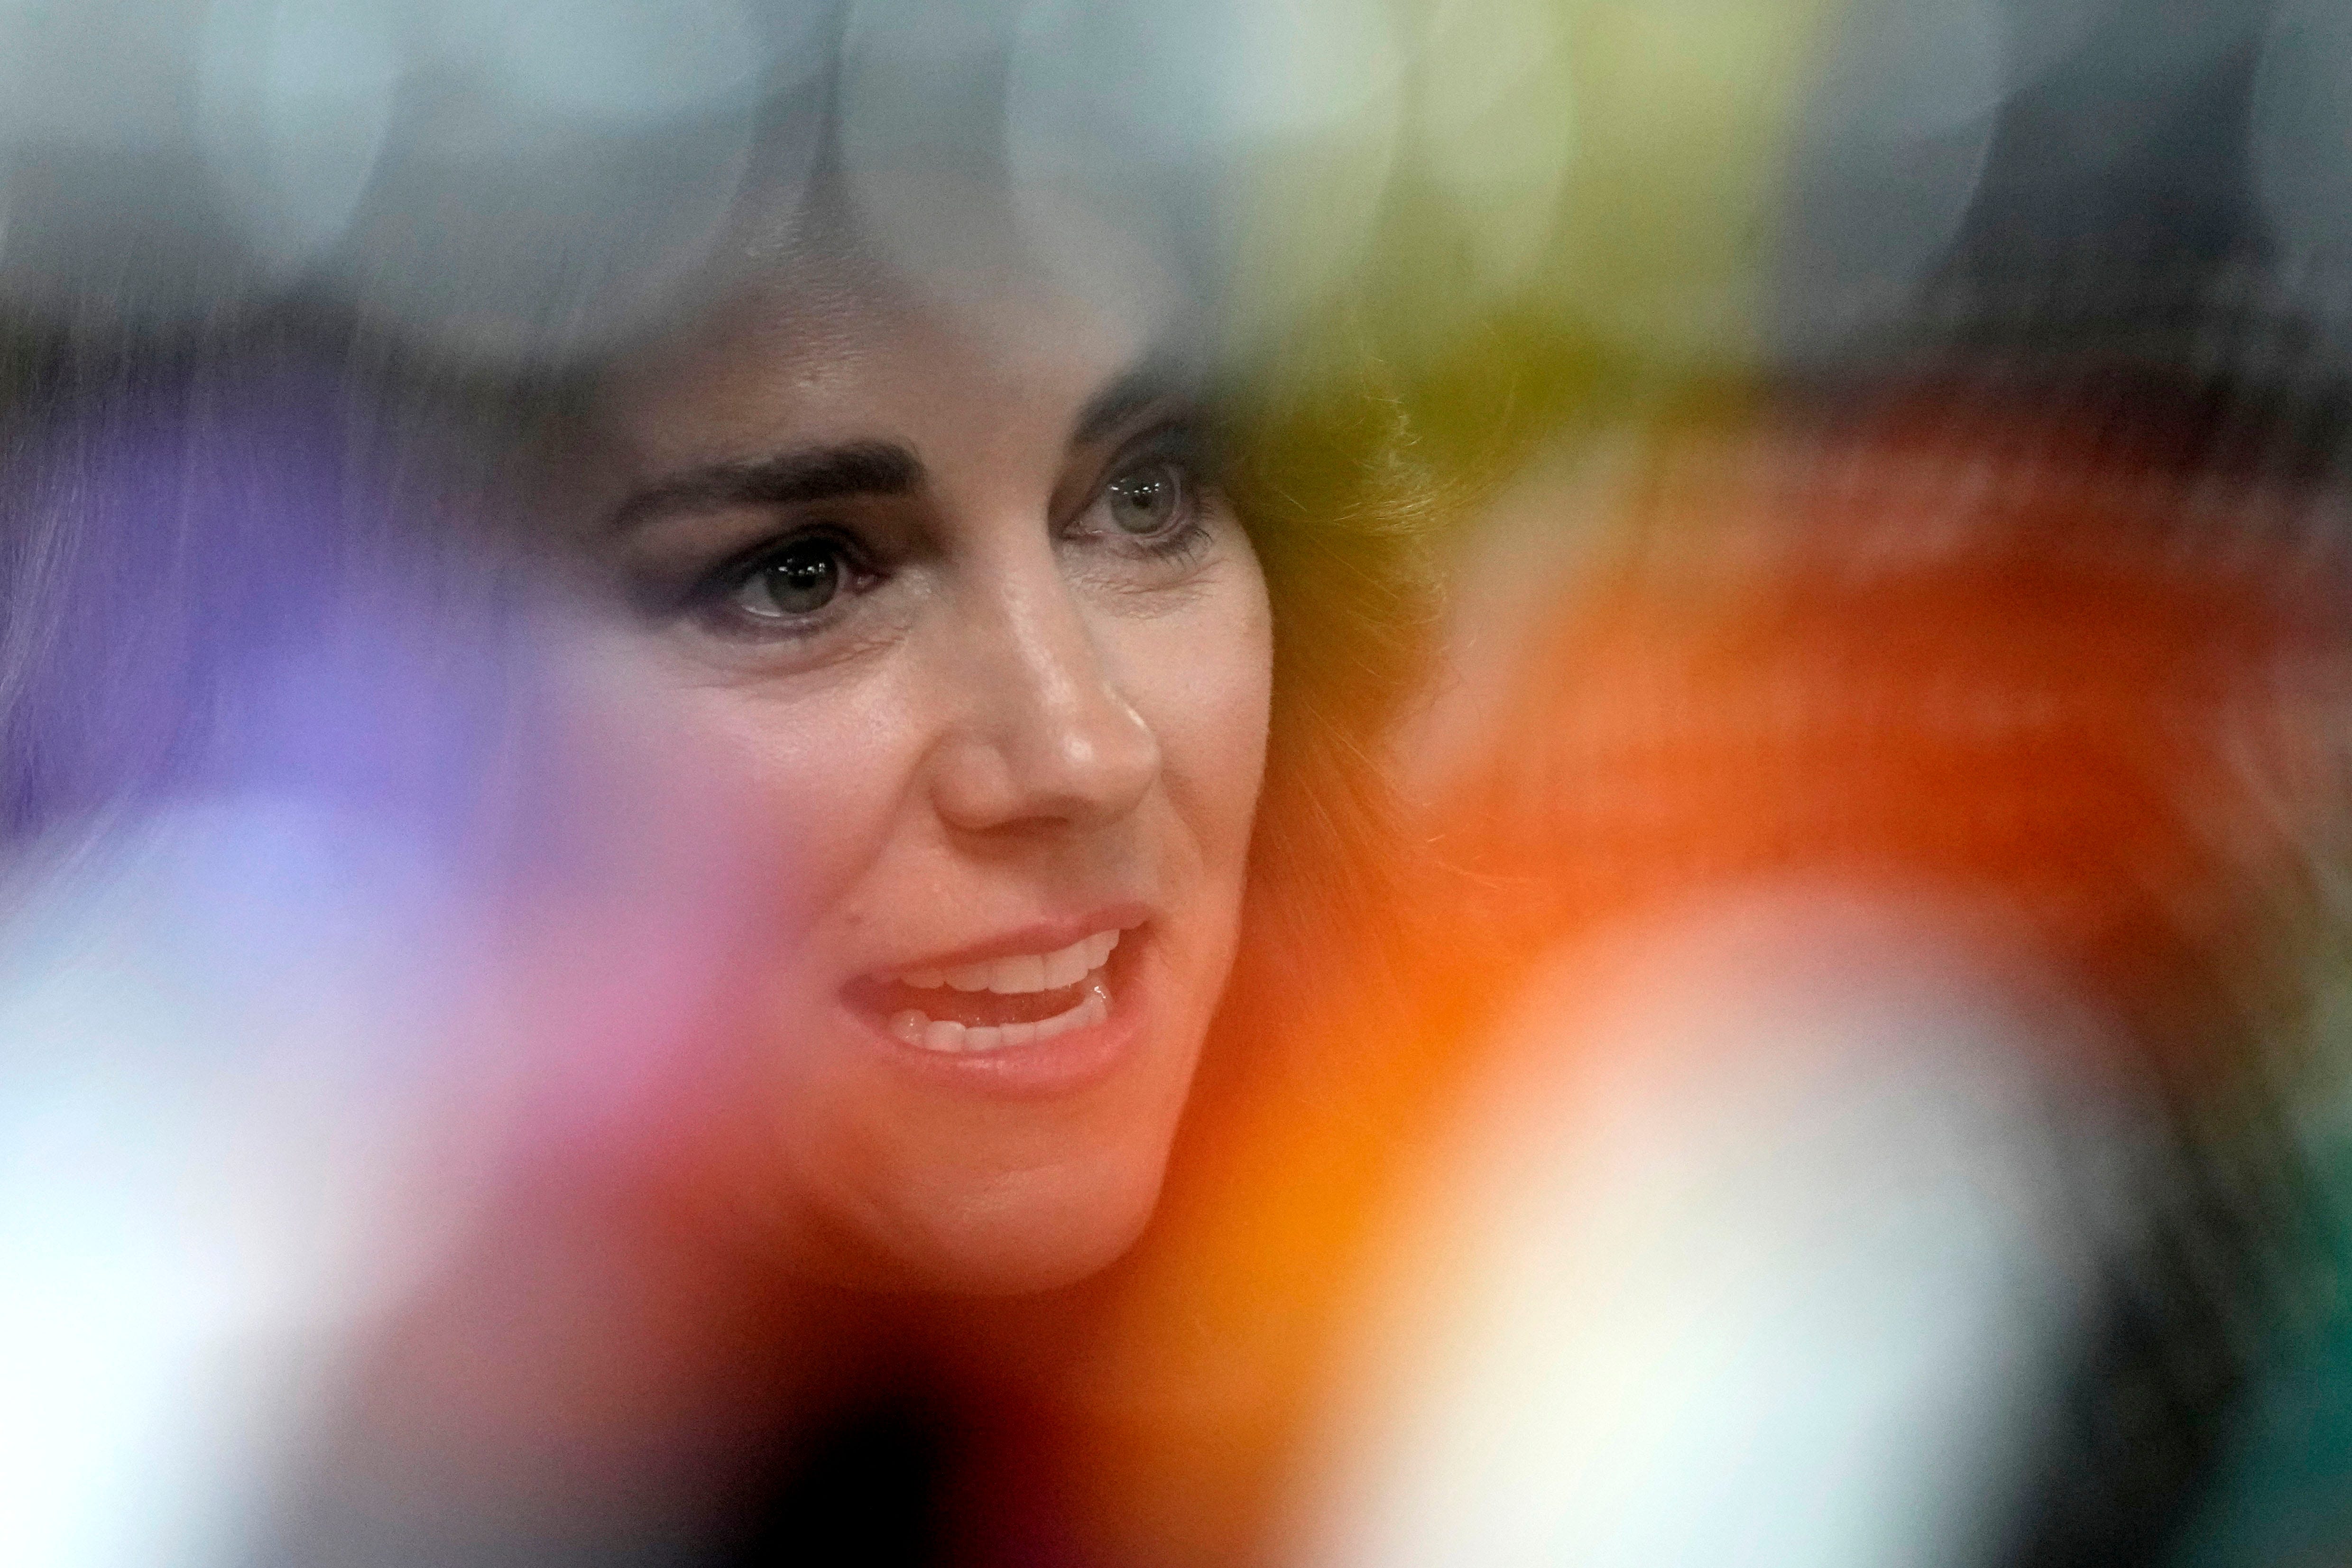 Kate Middleton's Apology Over Photoshop Is Fueling Conspiracy Theories